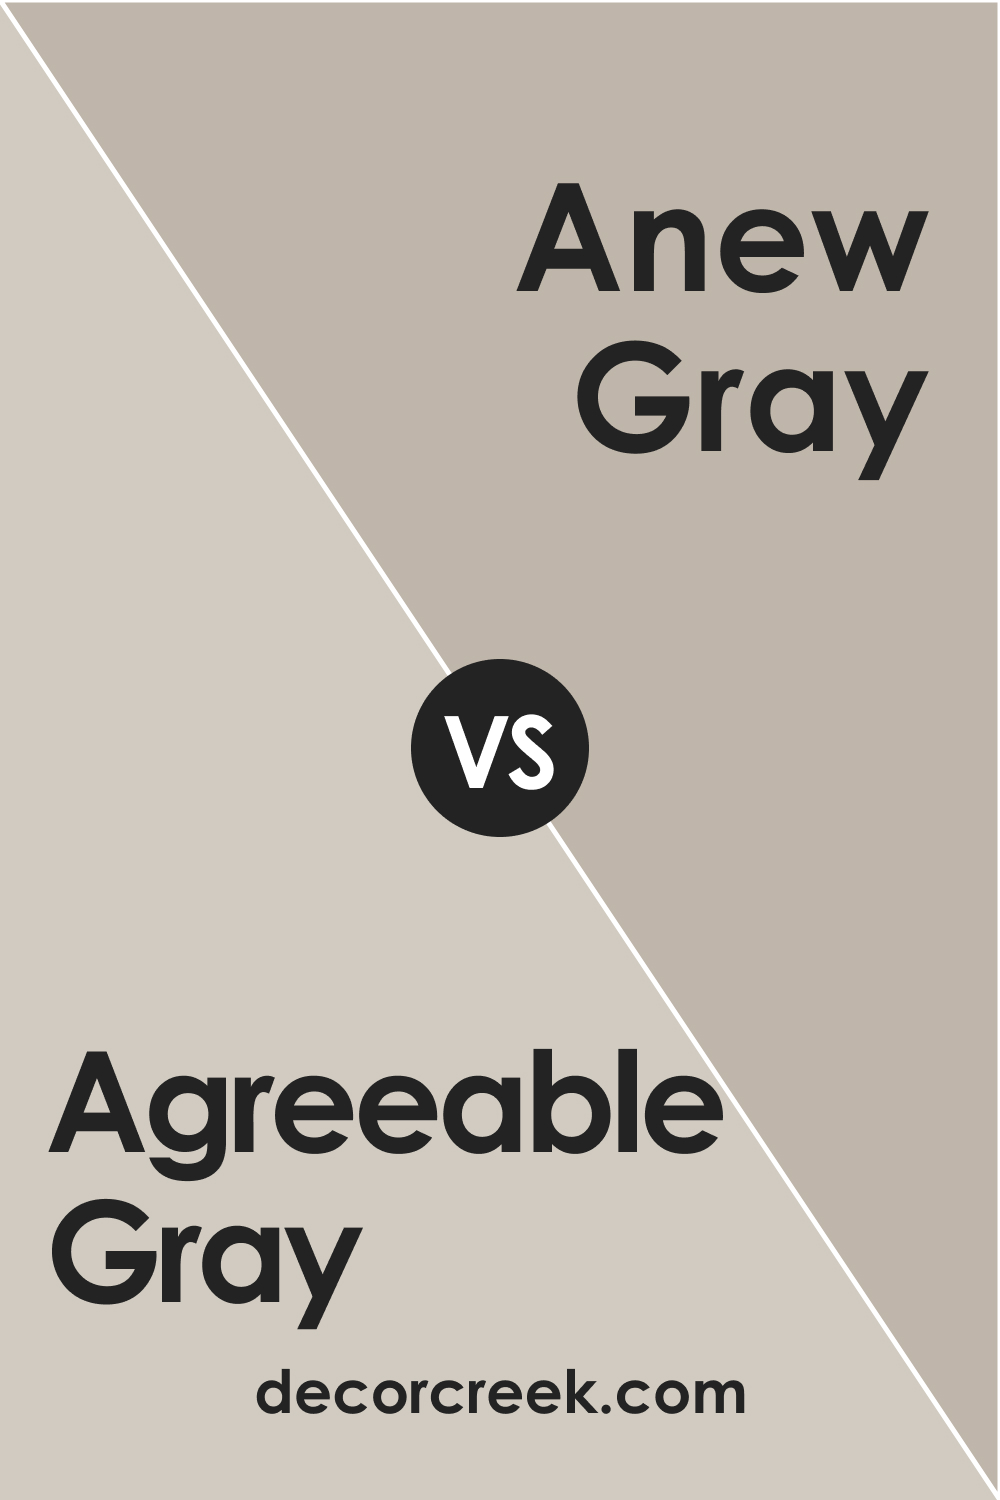 SW 7029 Agreeable Gray vs. SW 7030 Anew Gray